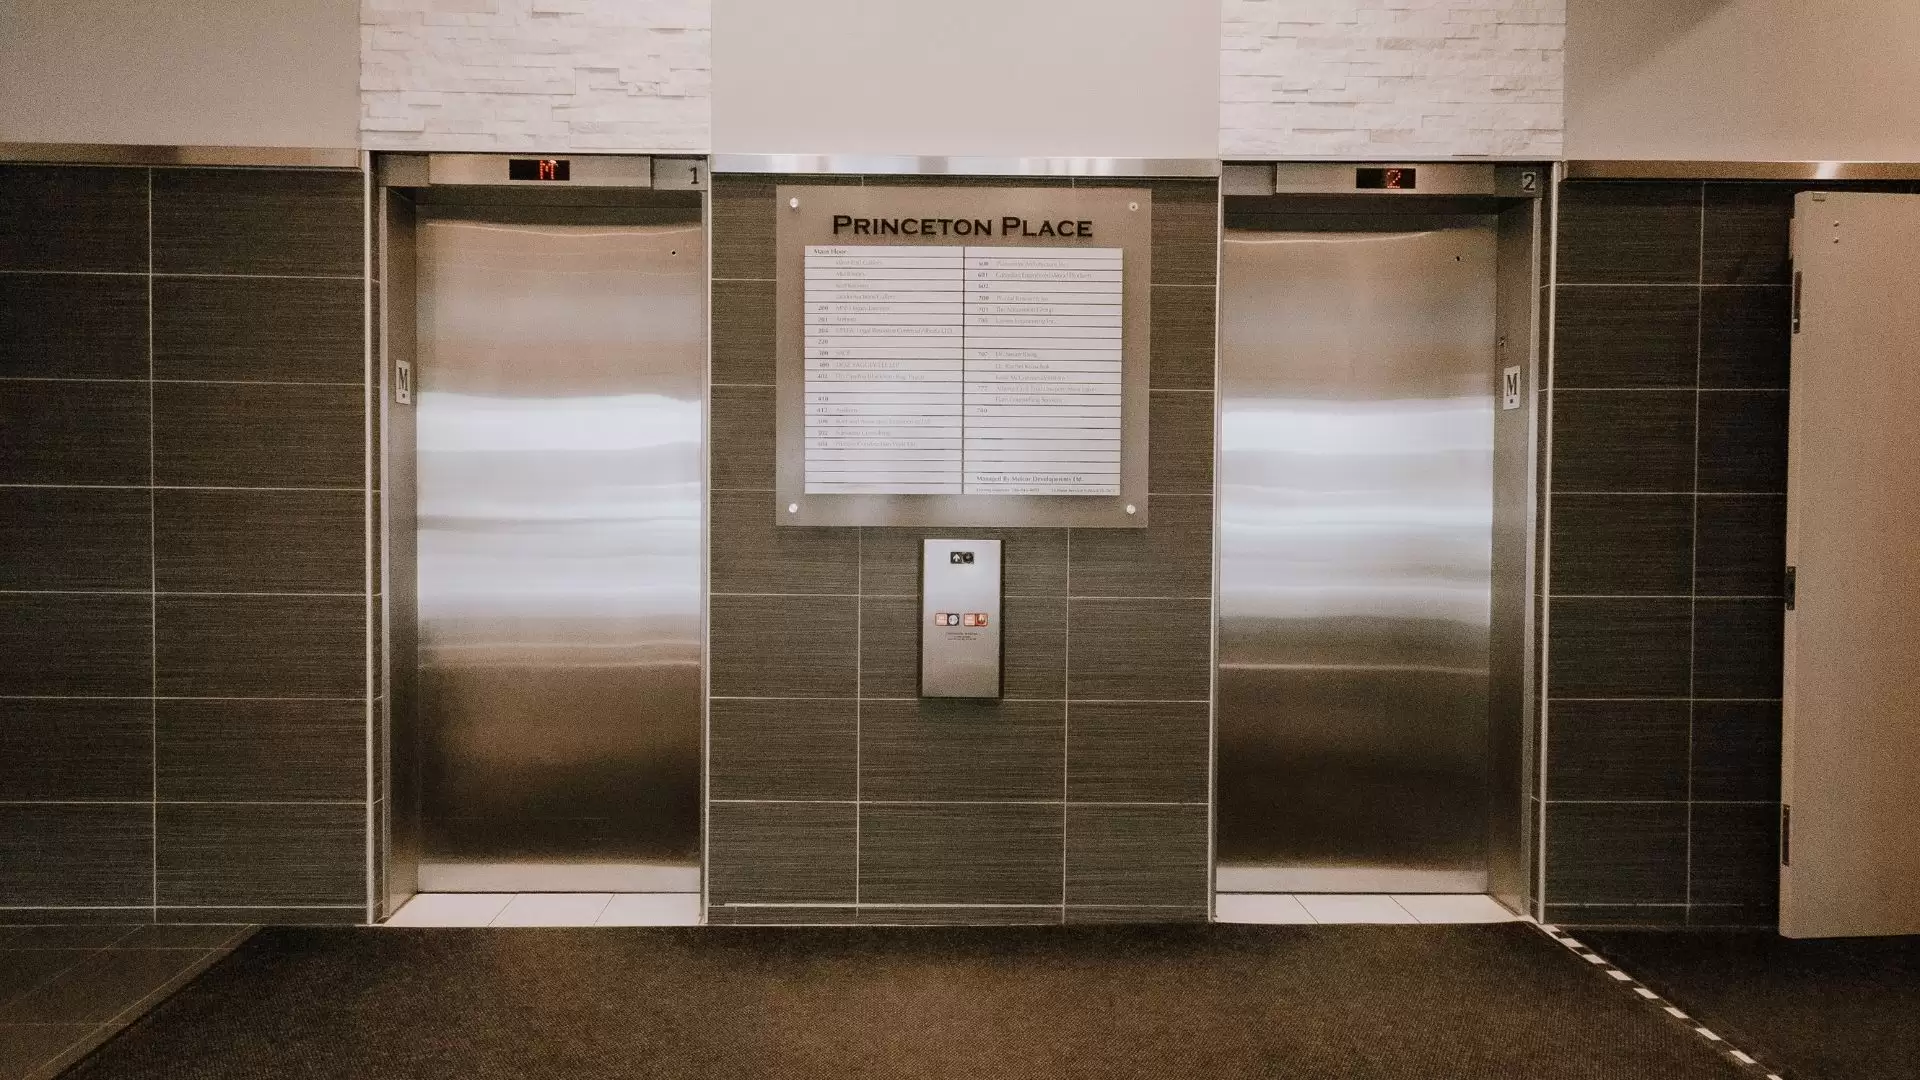 Lobby elevators with grey and neutral walls. The directory sign in the centre has text that says "Princeton Place" with elevator call buttons below.